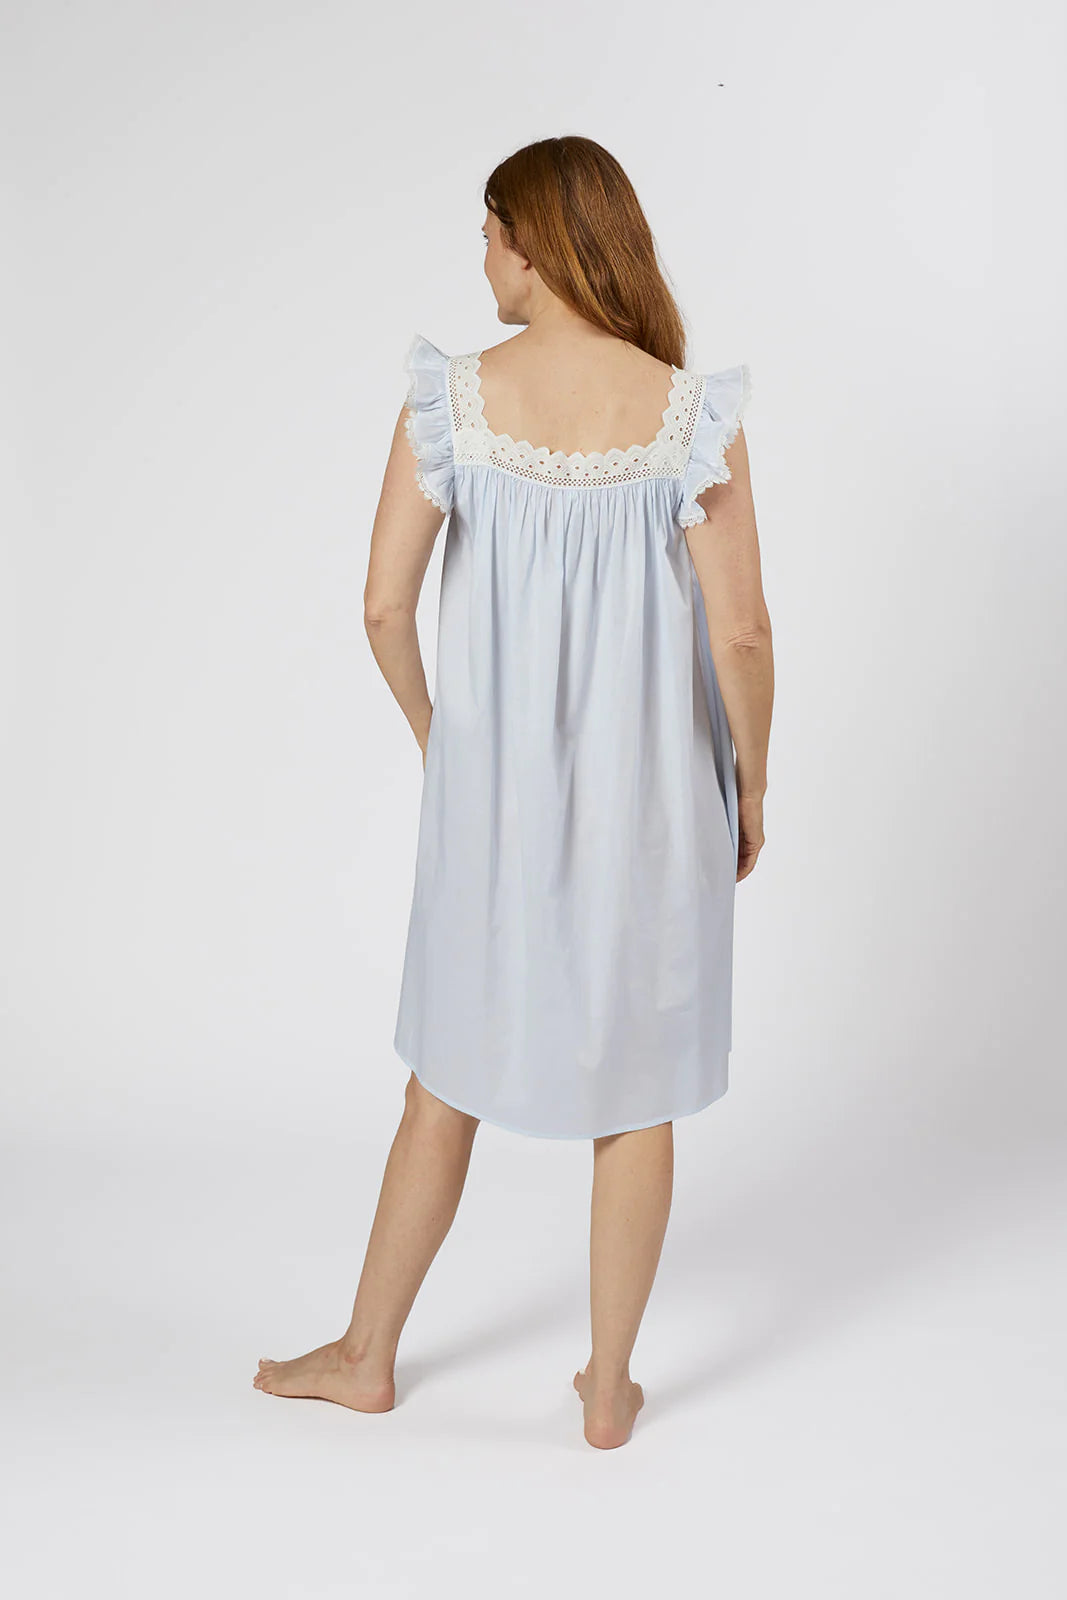 Maggie Cotton Nightgown in Blue By Lenora - S-XL